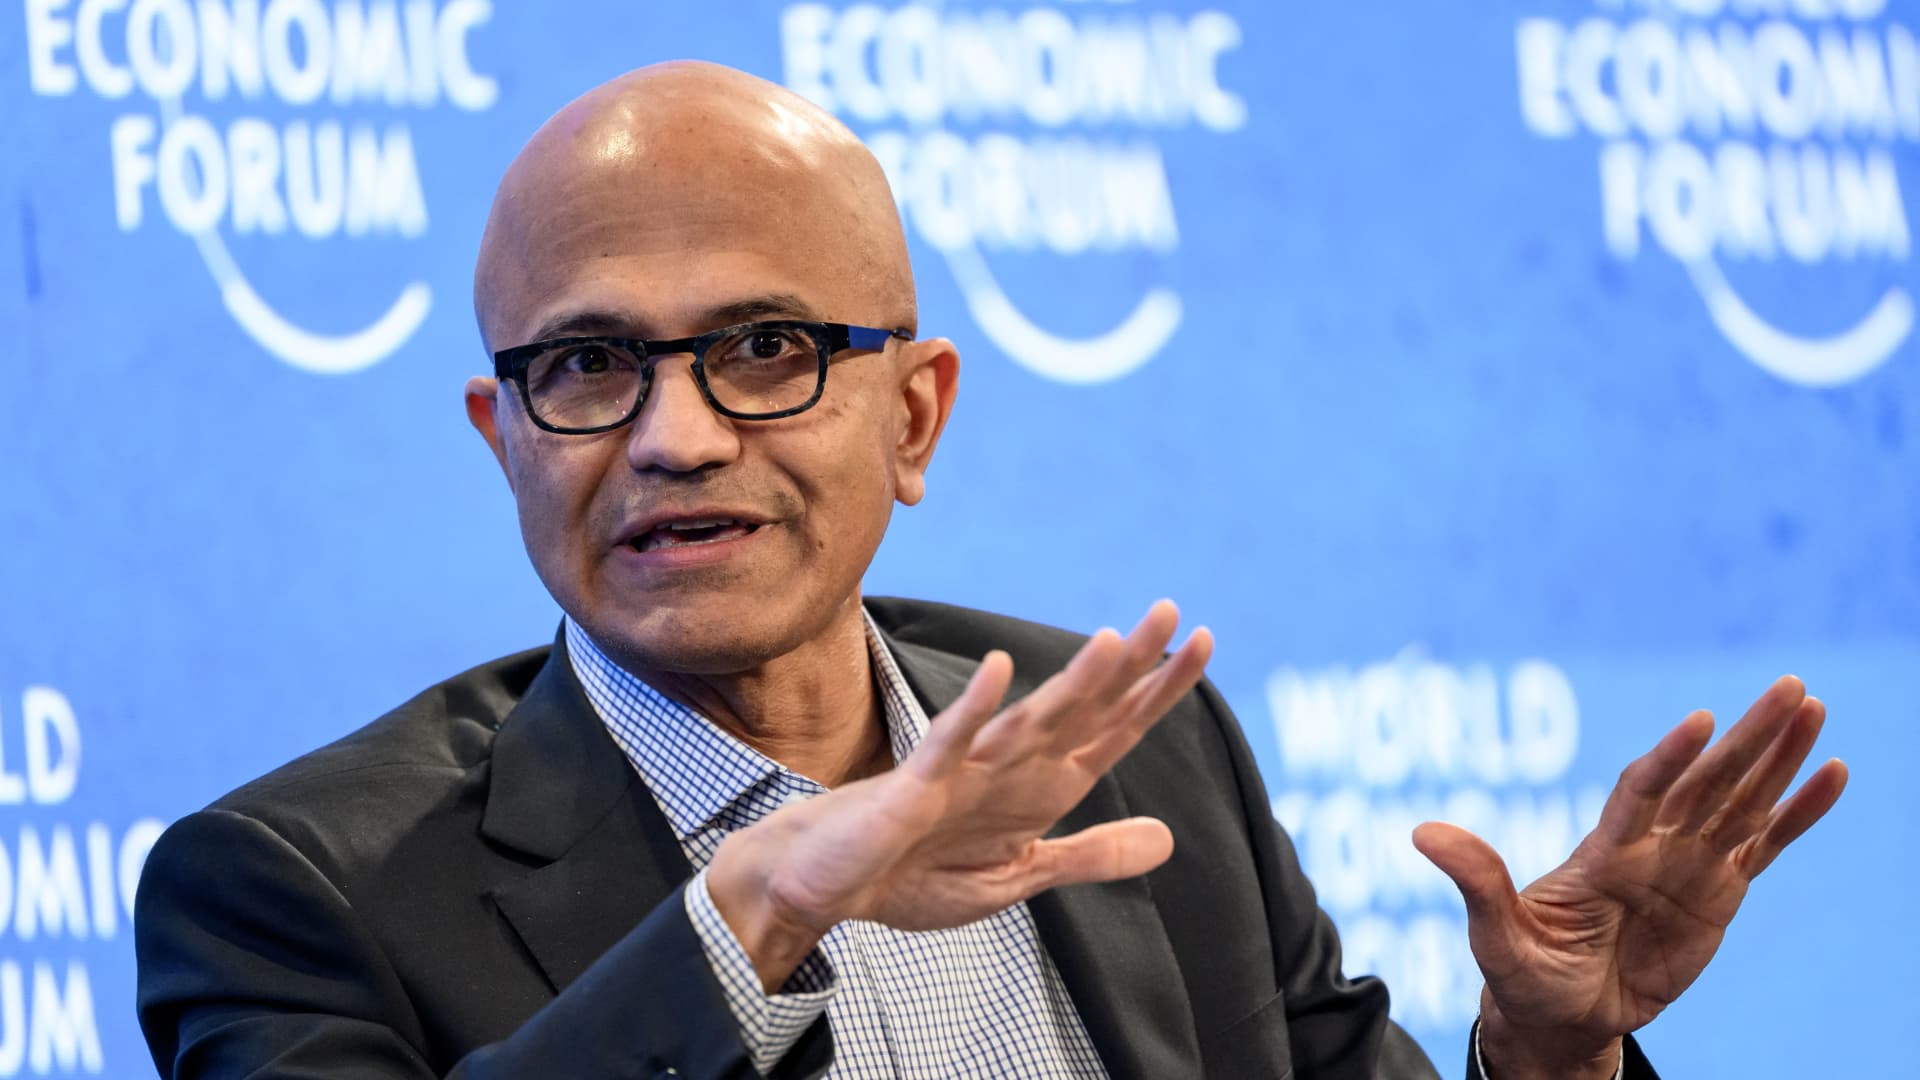 Microsoft CEO Satya Nadella gestures during a session at the World Economic Forum annual meeting in Davos on May 24, 2022.